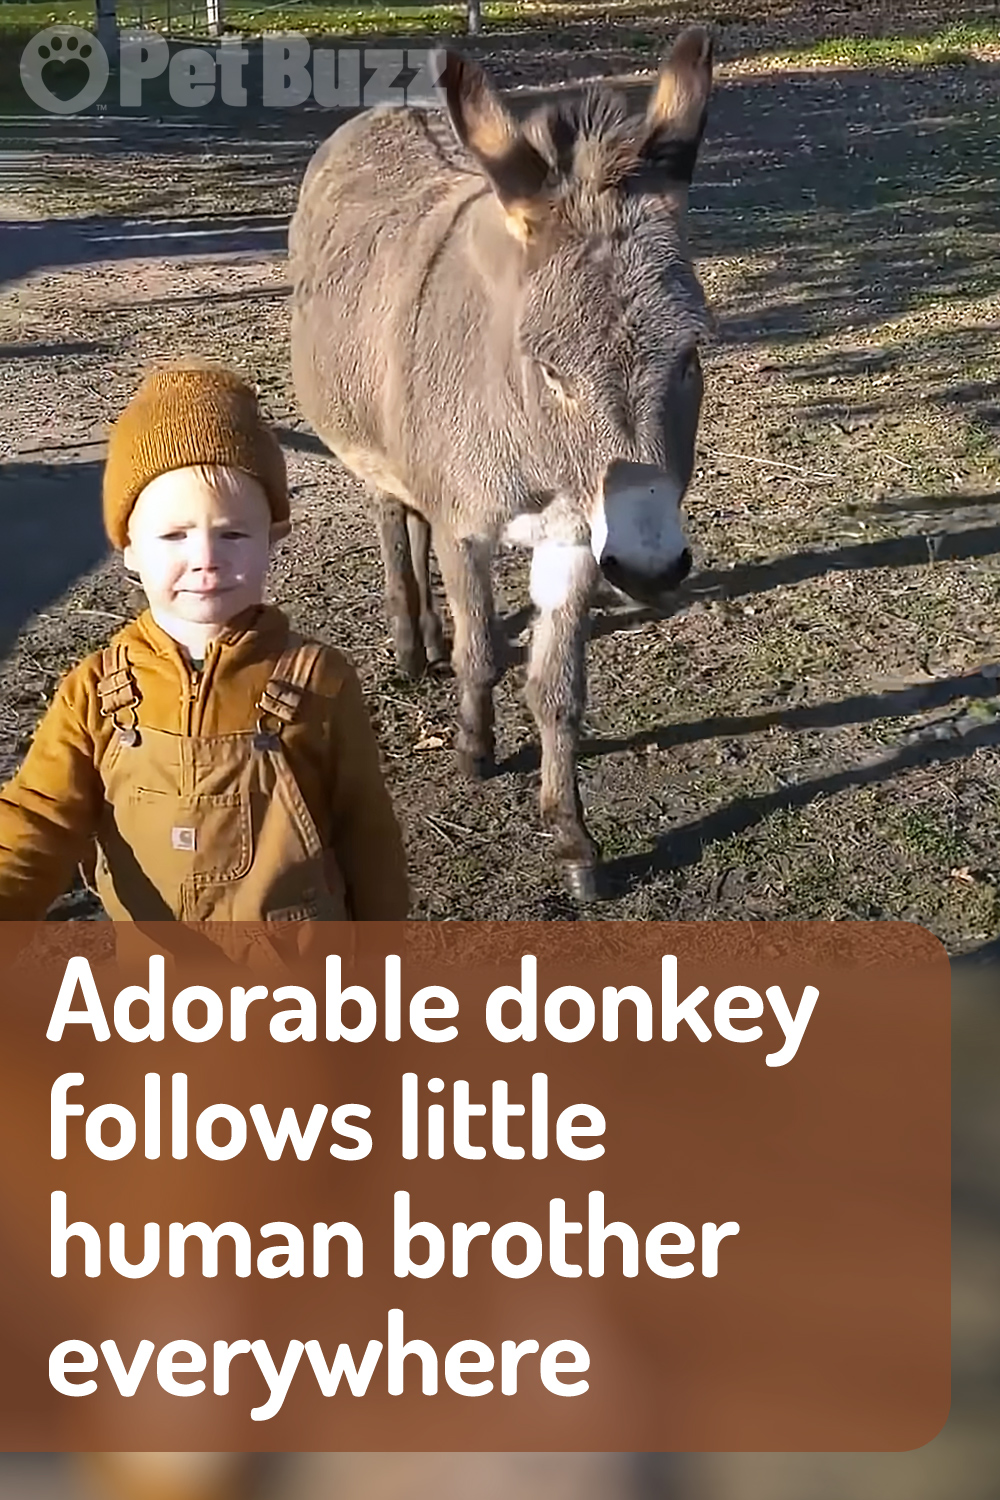 Adorable donkey follows little human brother everywhere